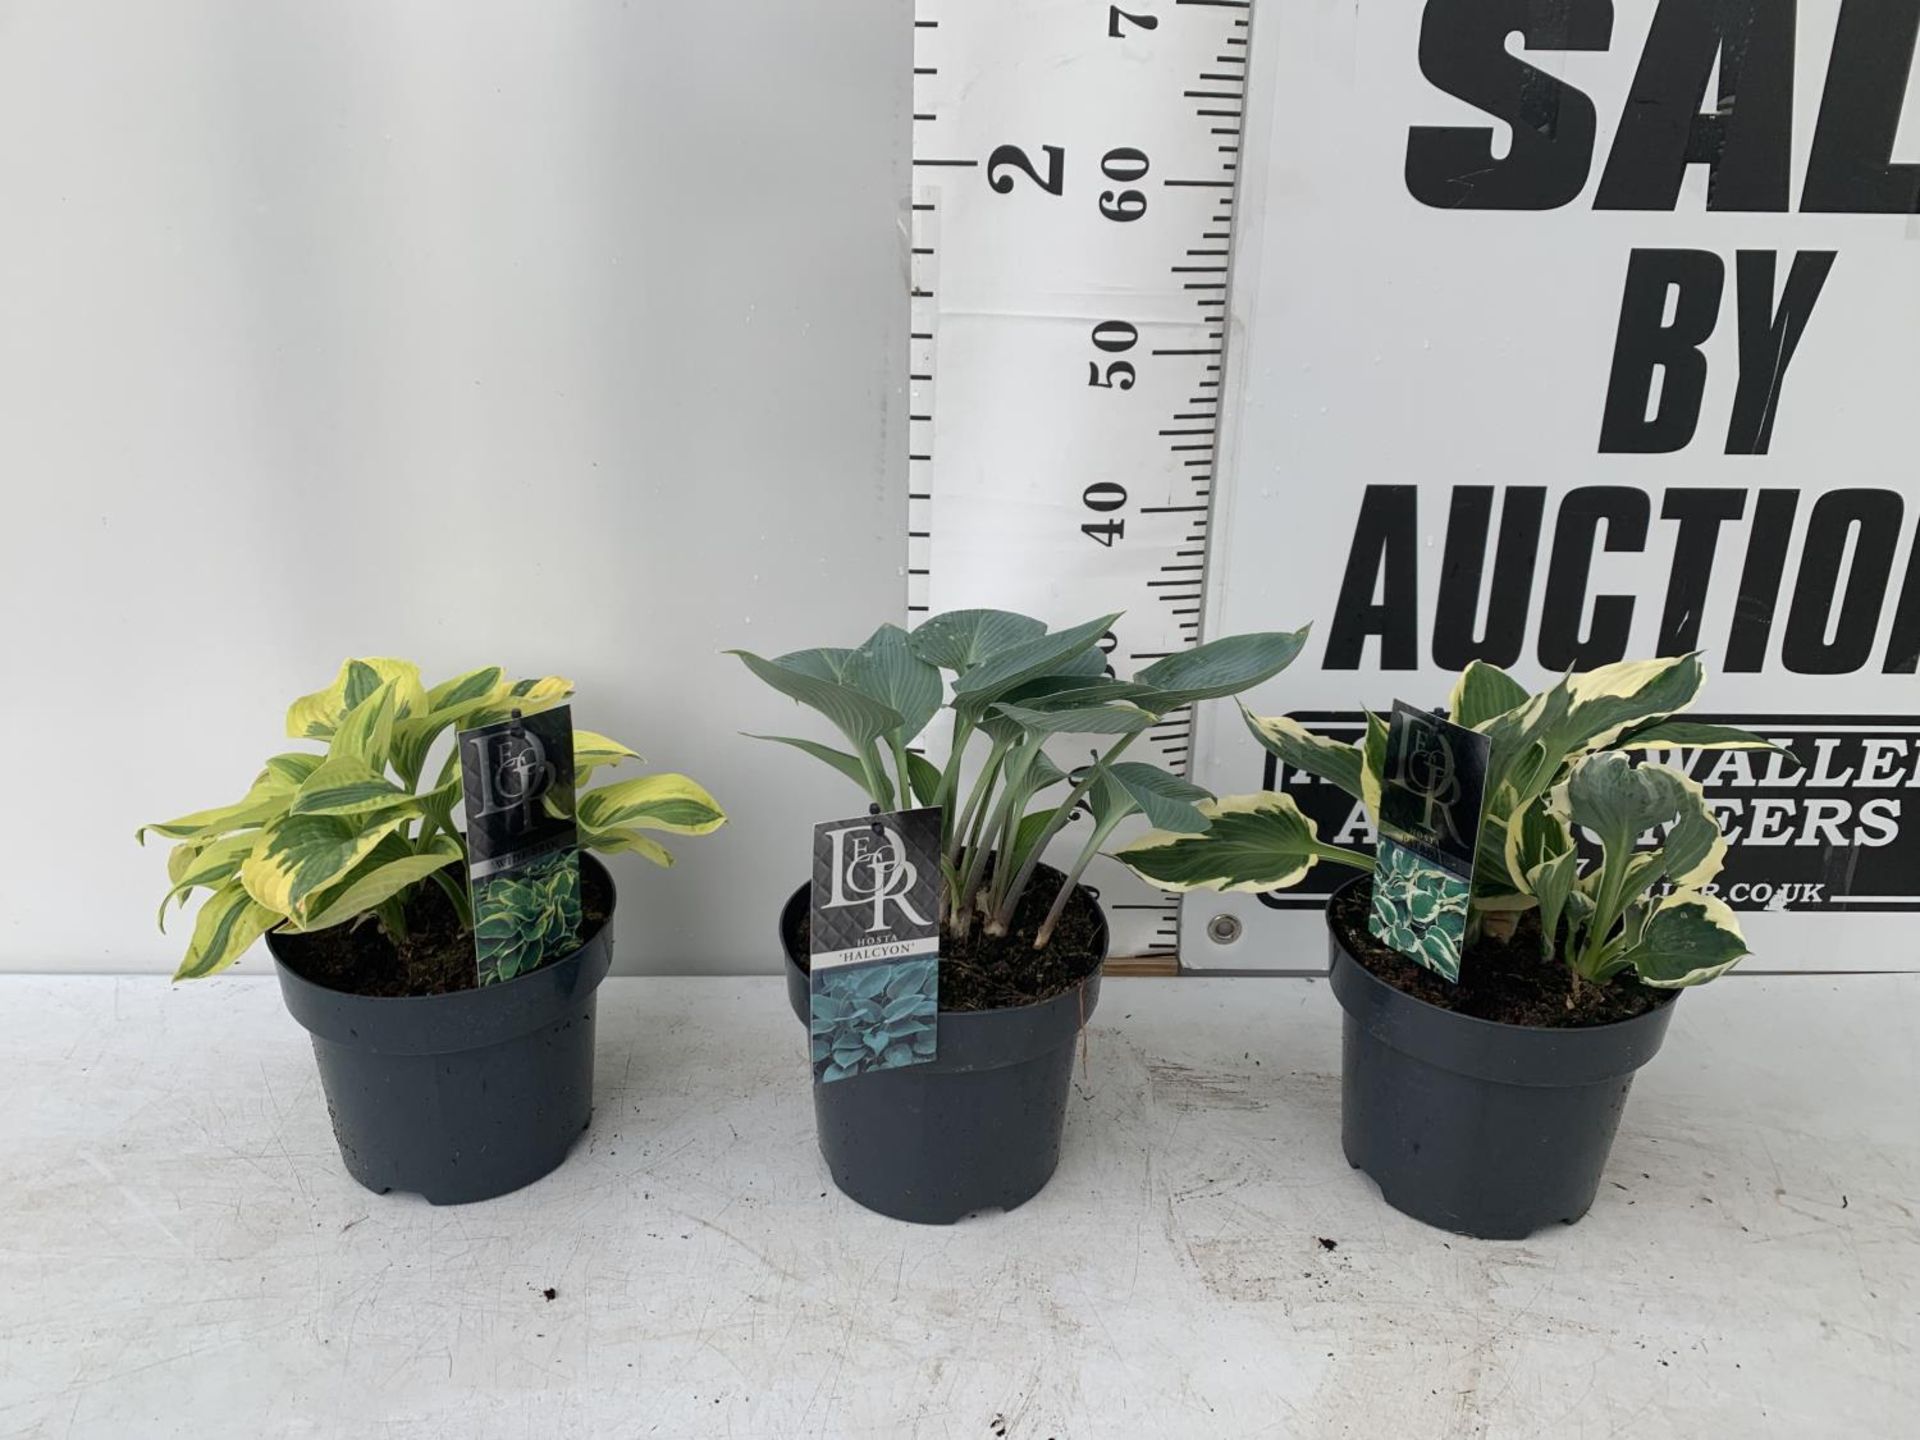 THREE MIXED VARIETY HOSTAS TO INCLUDE WIDE BRIM, HALCYON AND PATRIOT IN 3 LTR POTS 30CM TALL TO BE